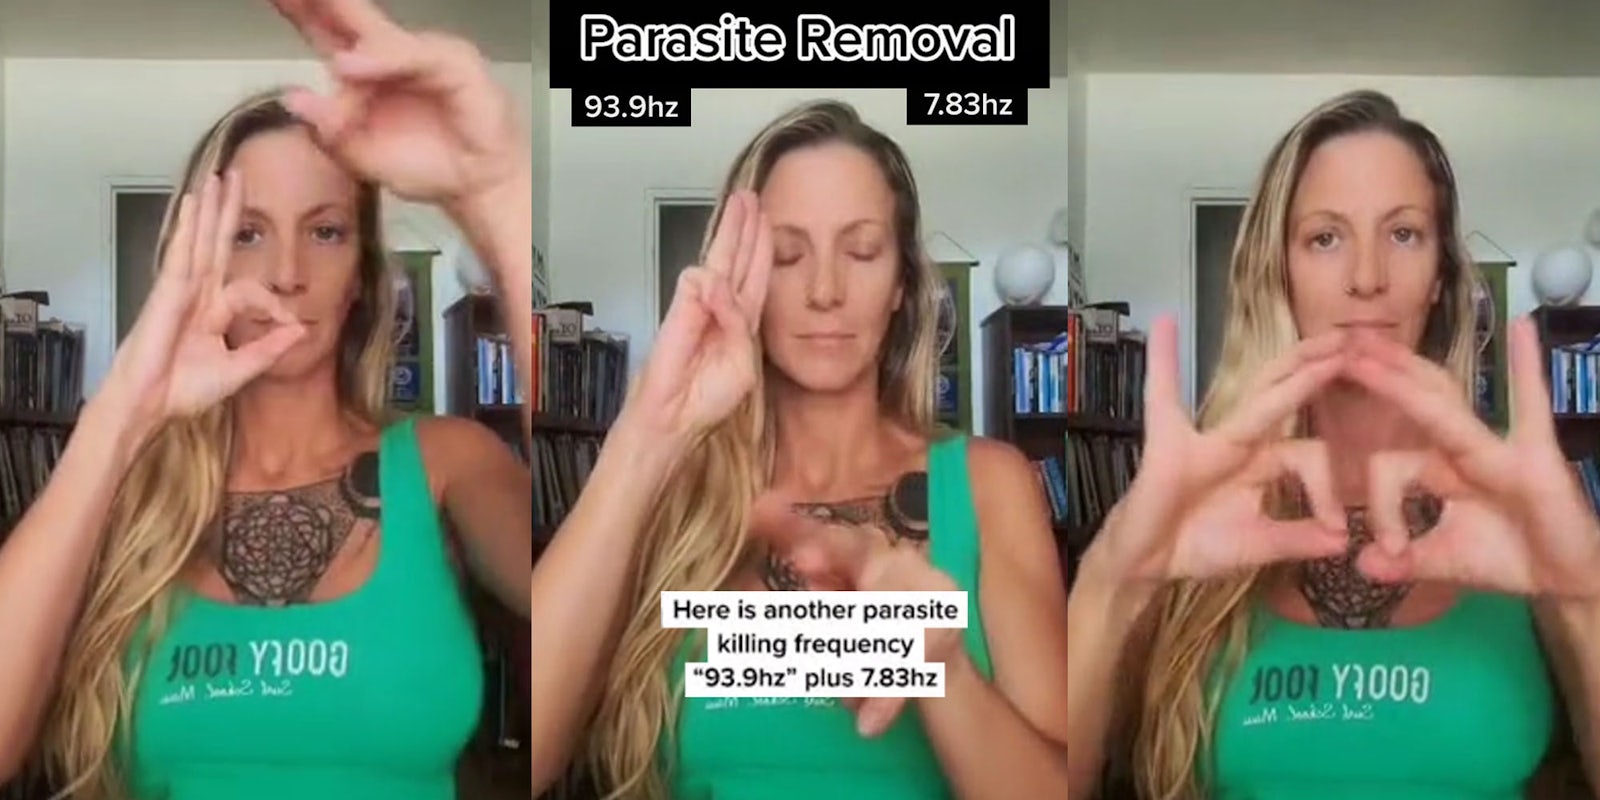 Woman moving hands spiritually (l) woman closed eyes hands moving spiritually caption 'Parasite Removal 93.9hz 7.83hz Here is another parasite killing frequency '93.9hz plus 7.83hz' (c) woman posing hands spiritually (r)